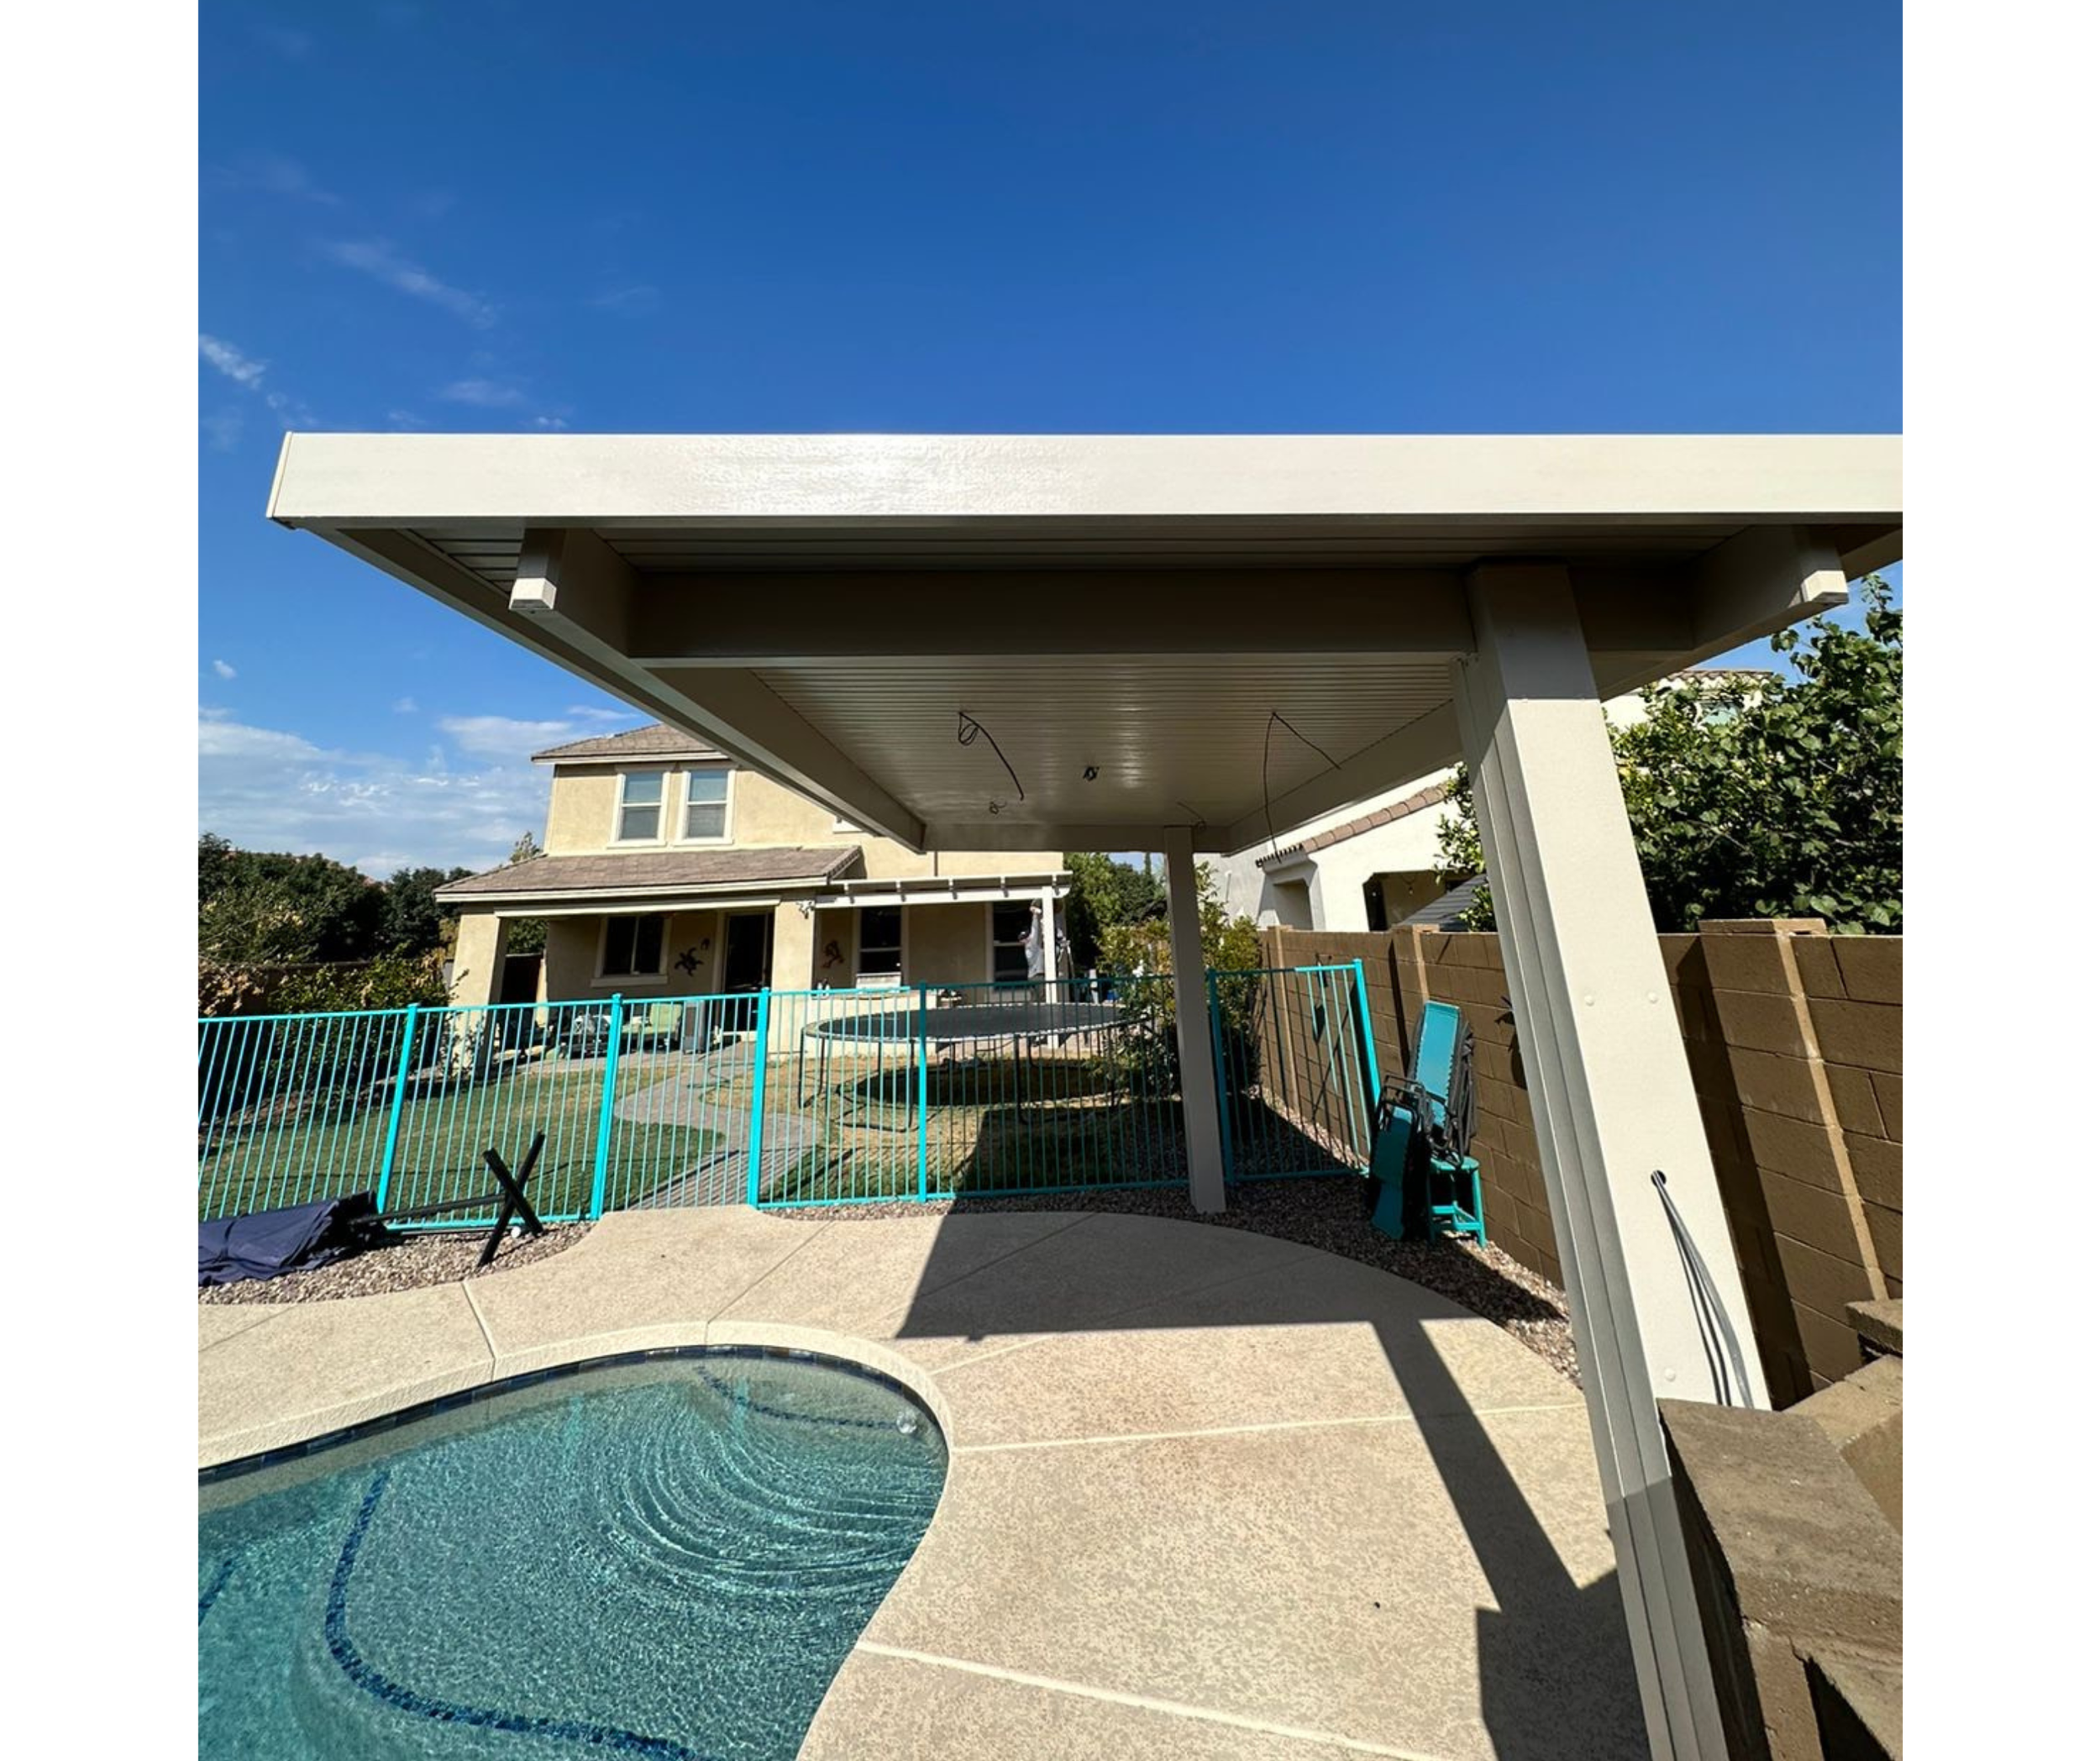 Insulated Solid Flat Pan Patio Cover Installed by Outshine Patio Cover near Phoenix Arizona